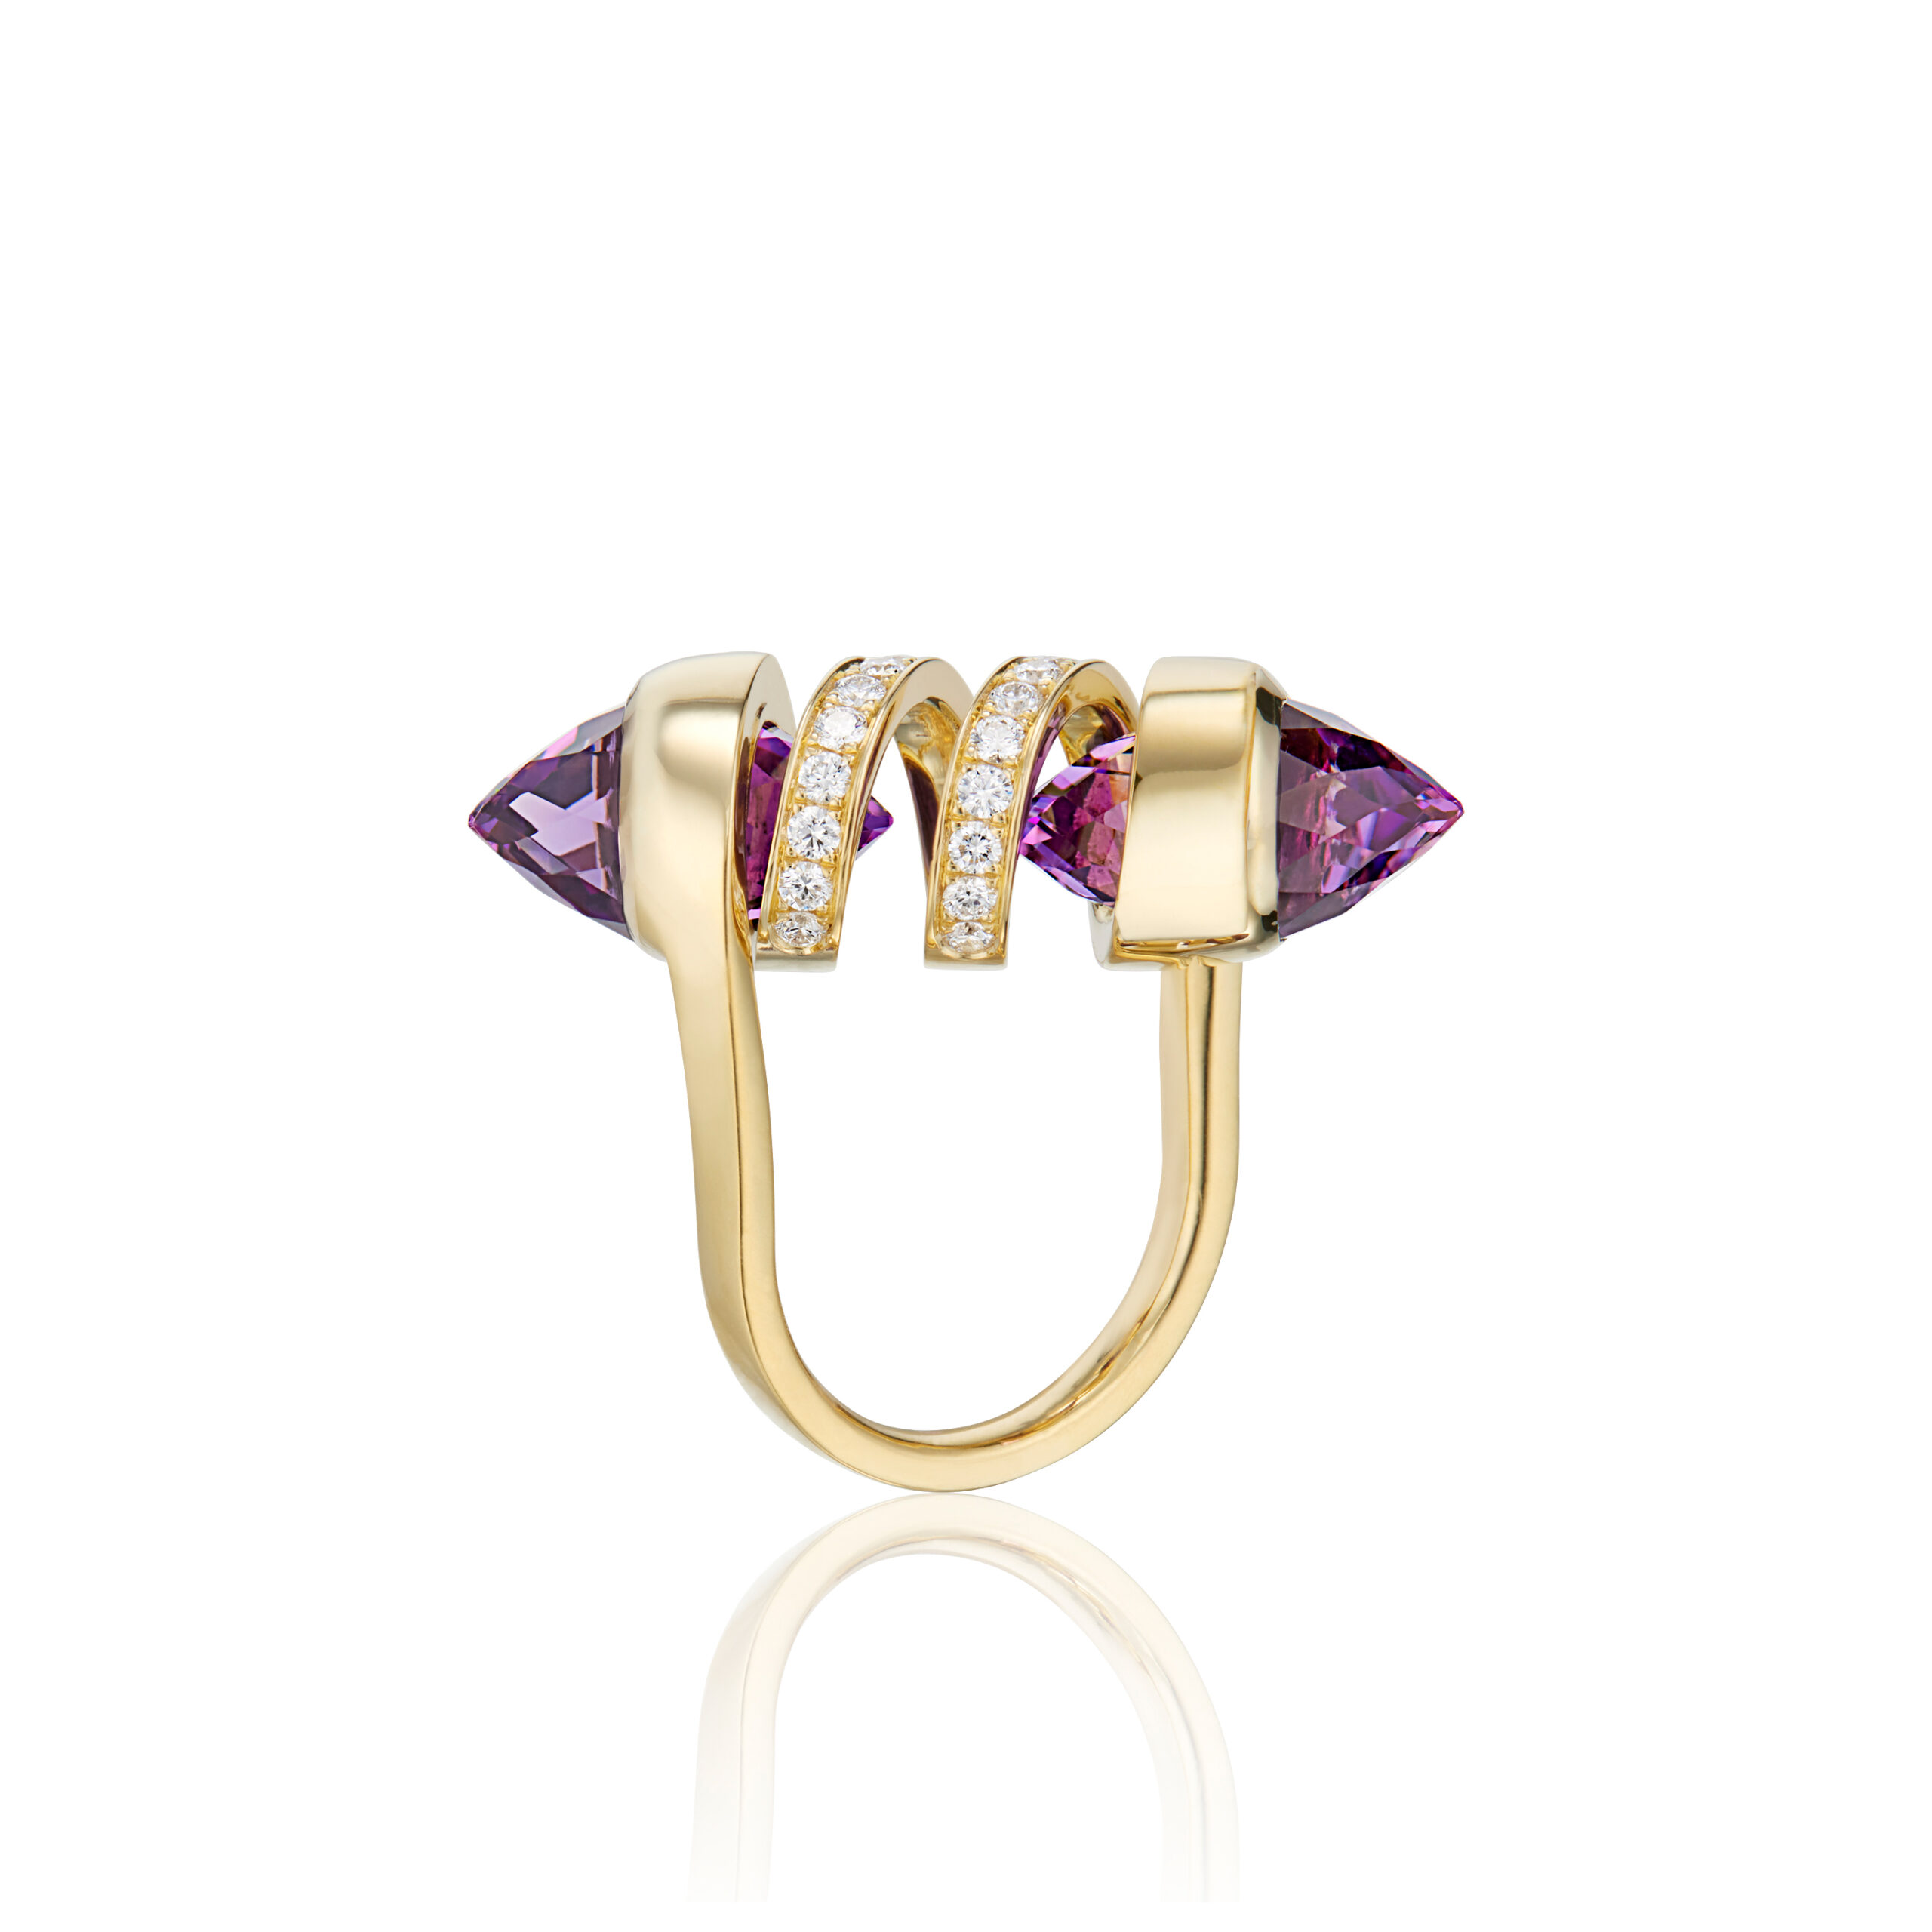 This is a side view of the Renisis Double Bullet Curl Ring by designer, Sardwell. It features an 18K yellow gold with pavé diamonds and faceted Amethyst bullet stones. Its setting is spiral shaped yellow gold.